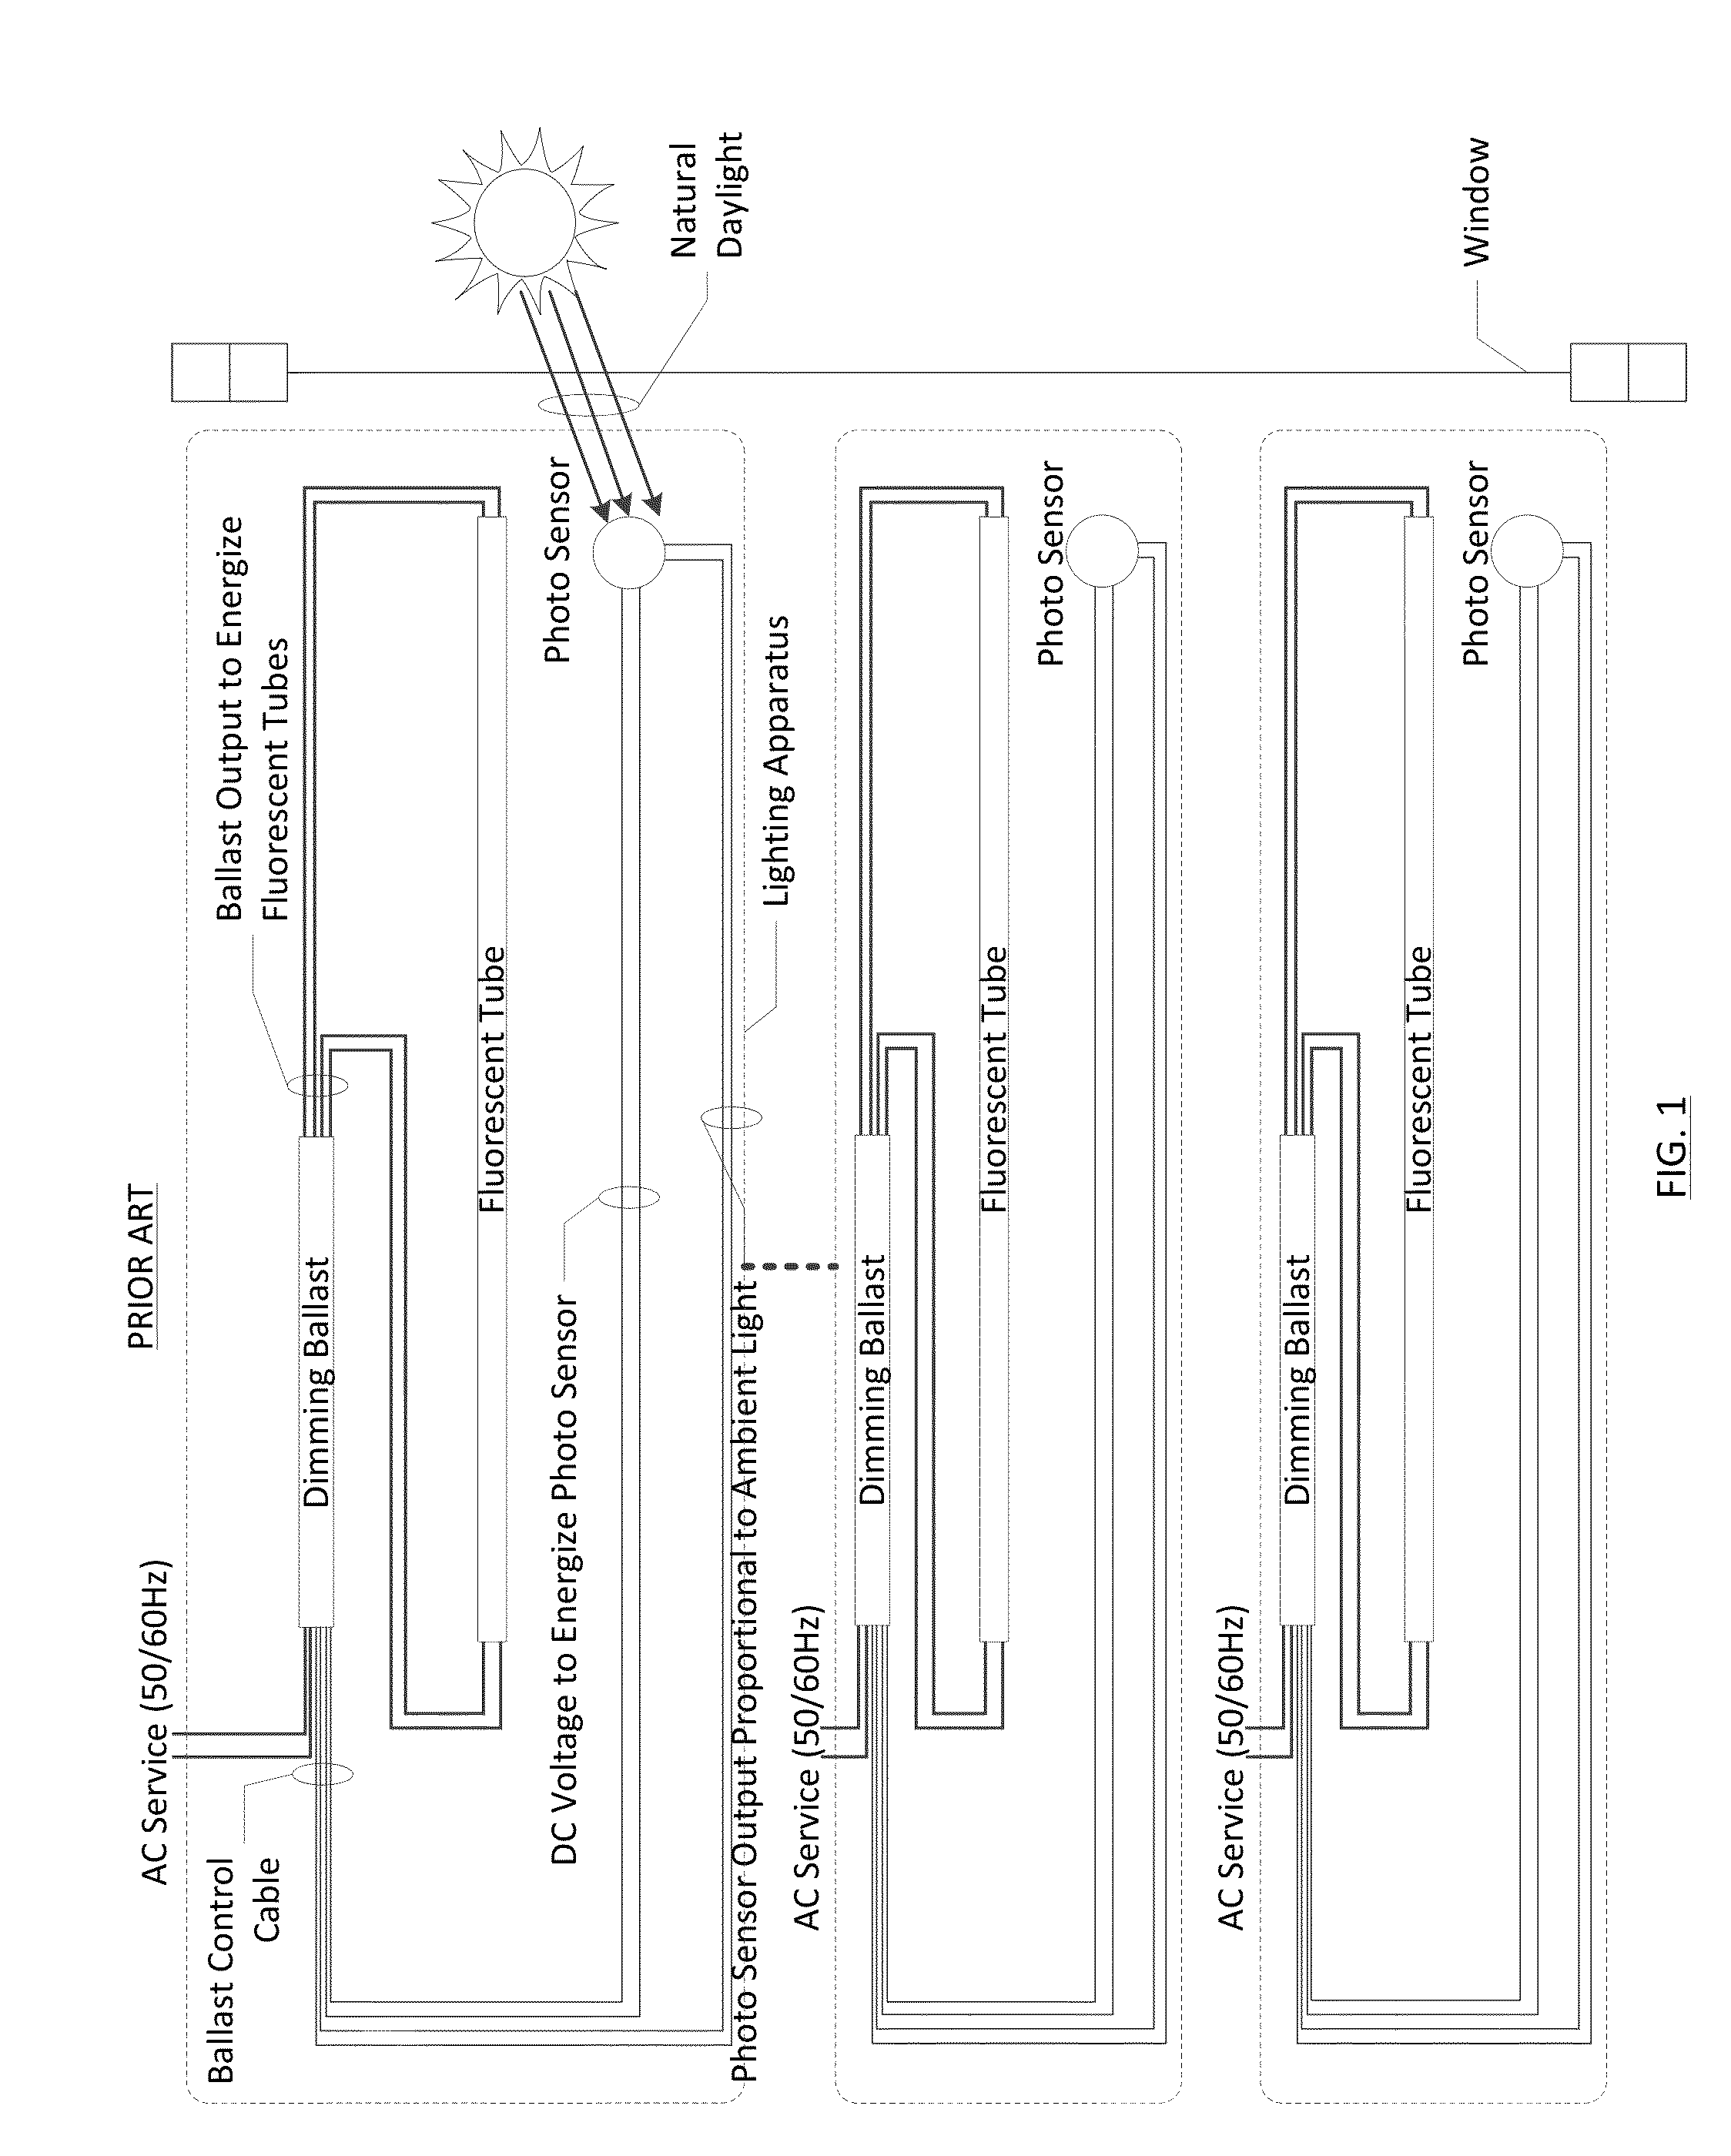 Wireless Daylight and Occupancy Controlled Lighting Control Module and Lighting Apparatus